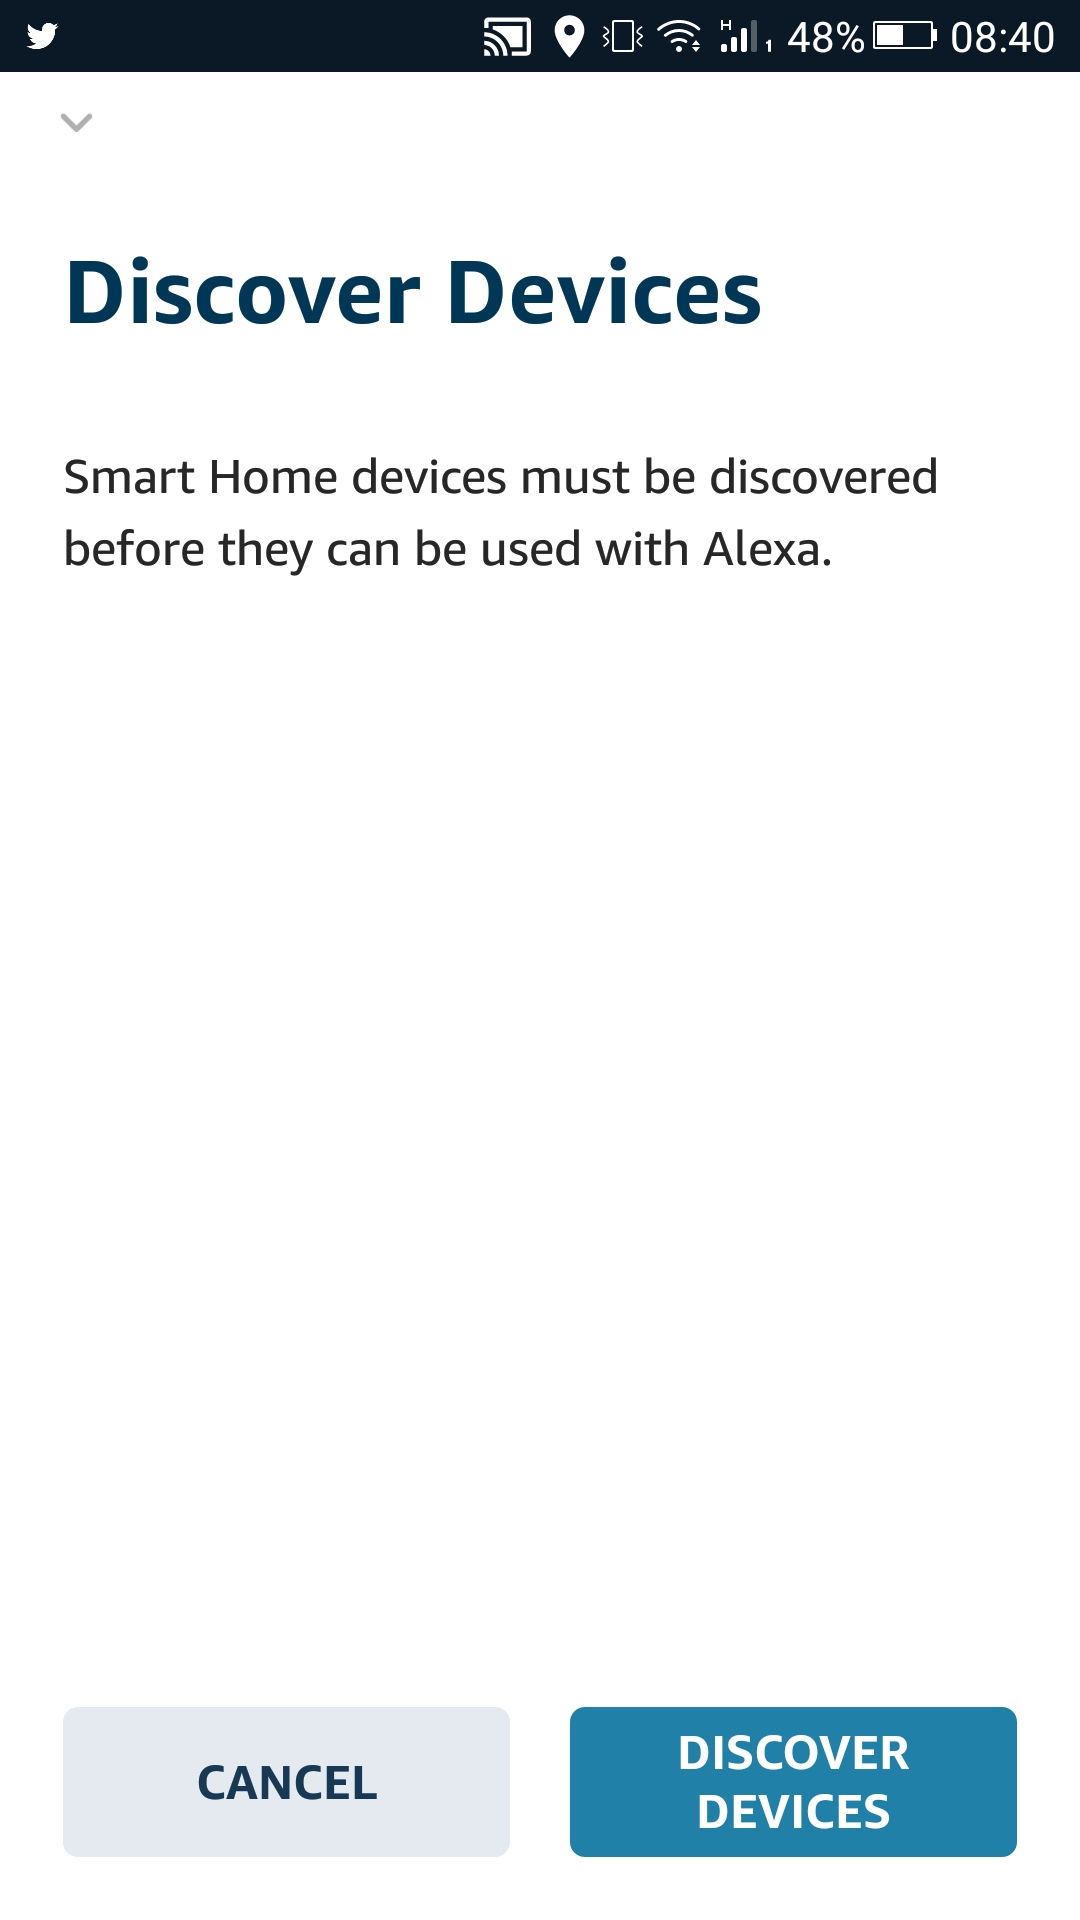 discover-devices.jpg